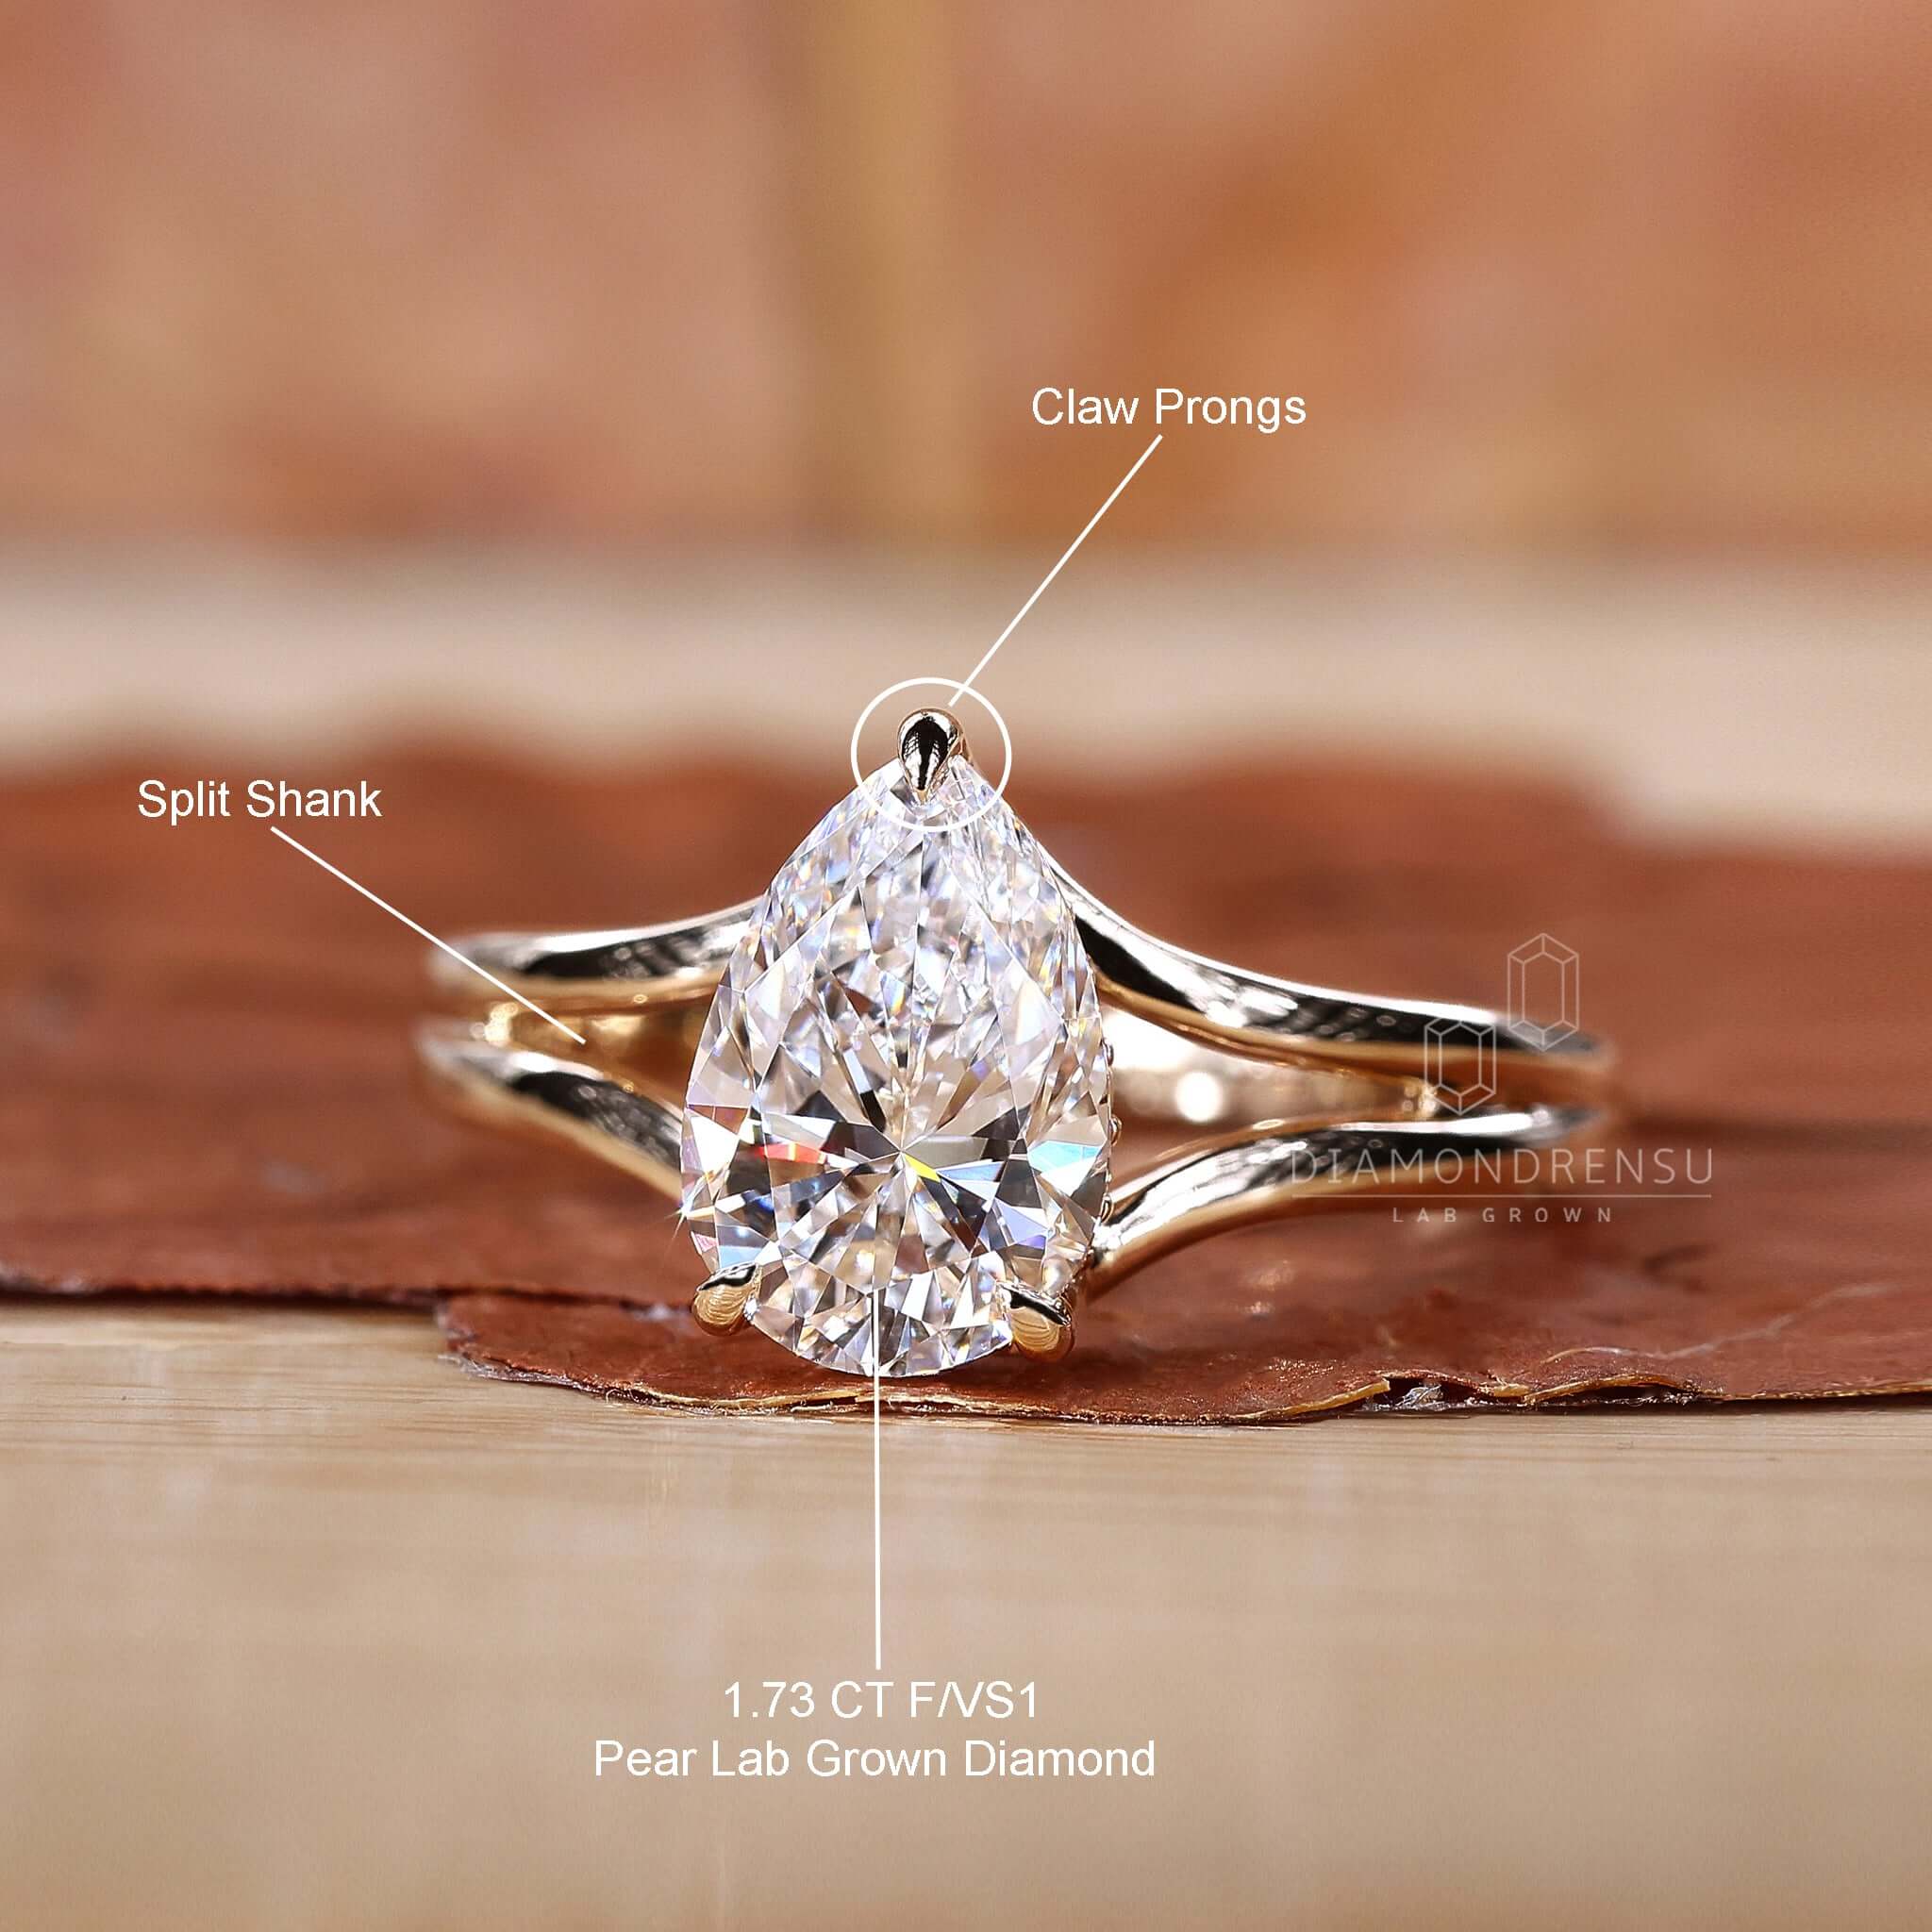 A Lab Grown Diamond Engagement Ring, the perfect gift for her on any occasion.